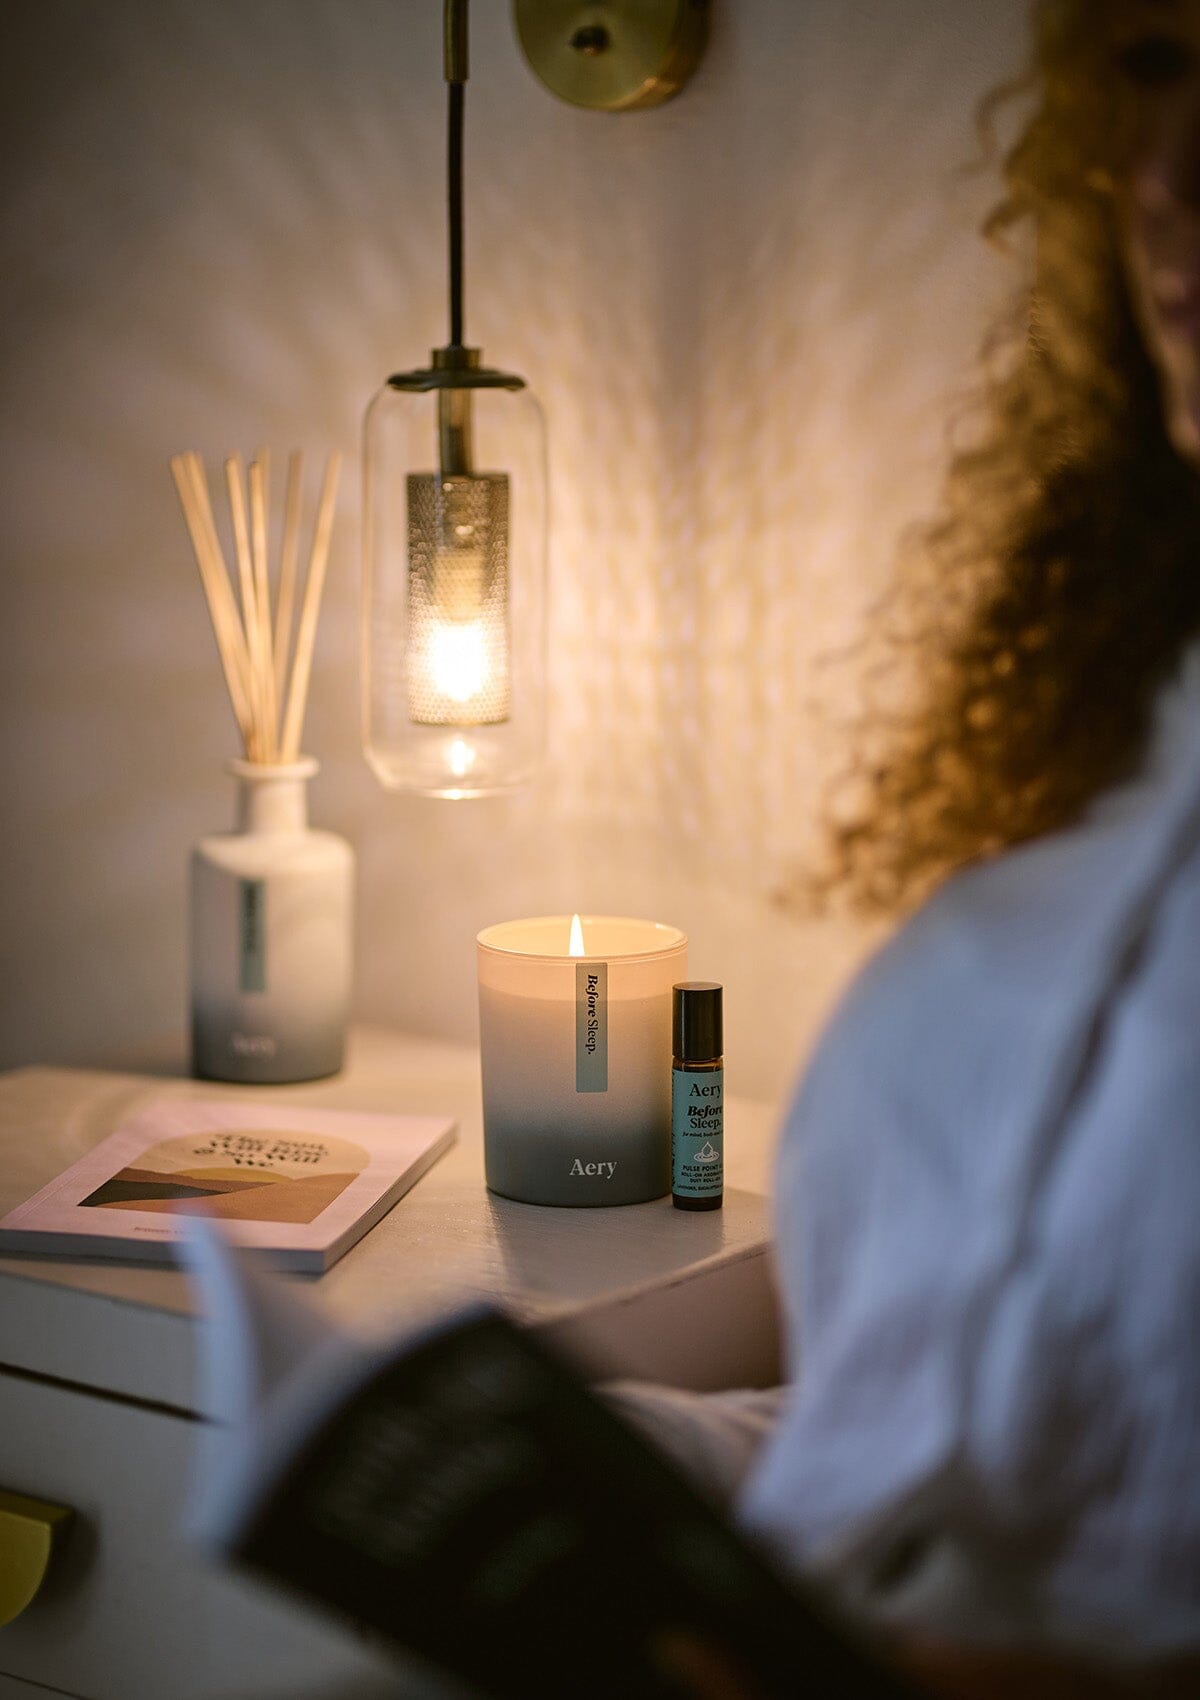 Blue Before Sleep pulse point oil displayed next to Before Sleep candle and diffuser by Aery on bedside table 